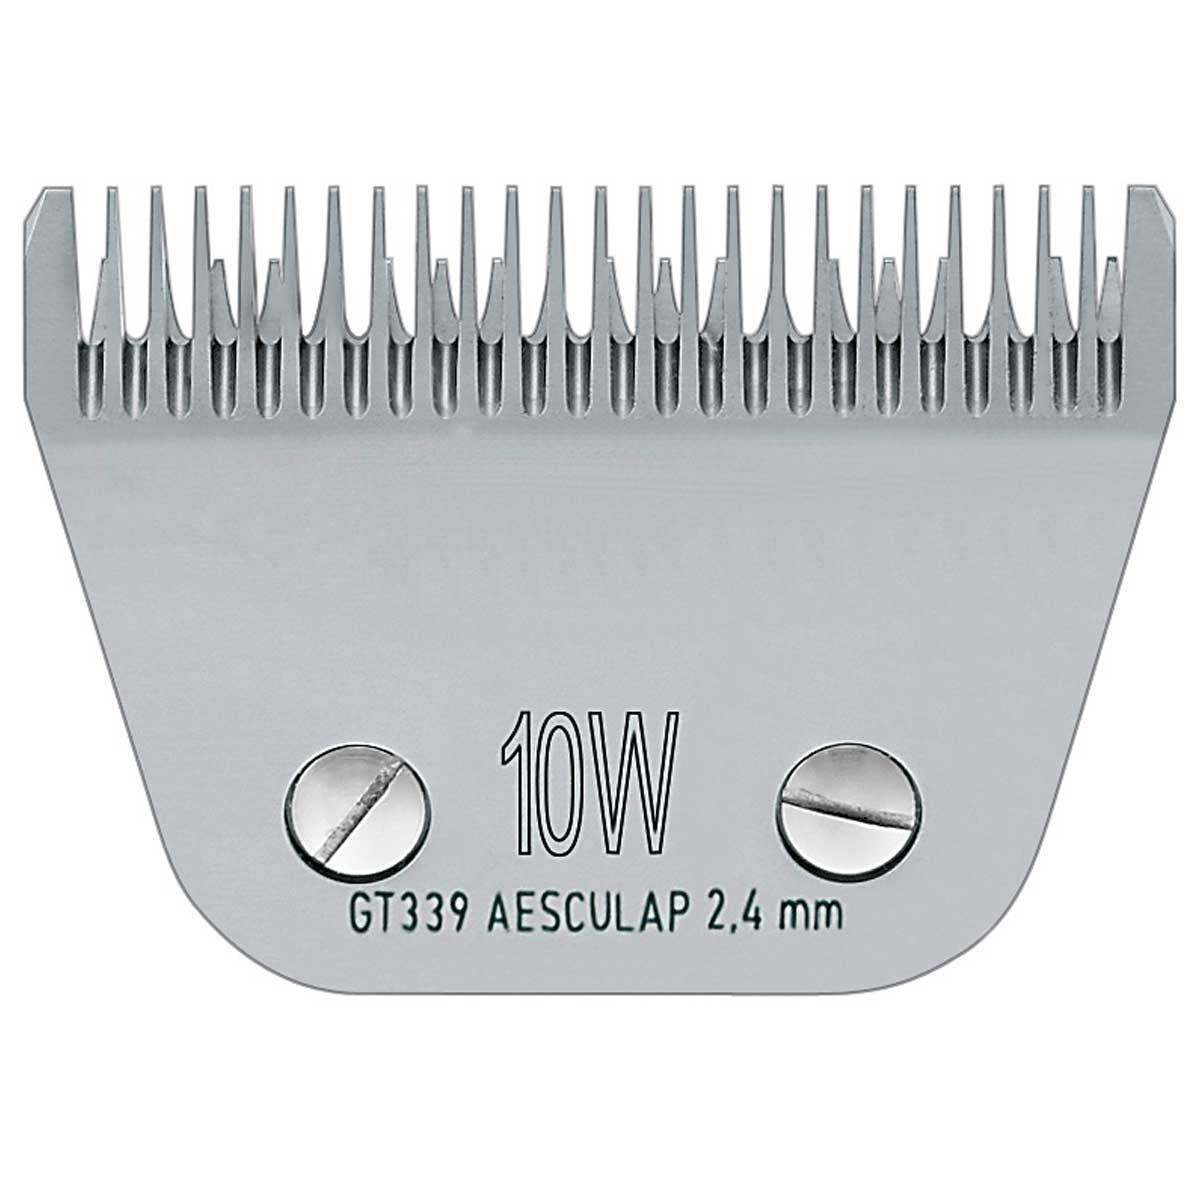 Aesculap Clipper Blade SnapOn 2,4 mm, GT339 #10W